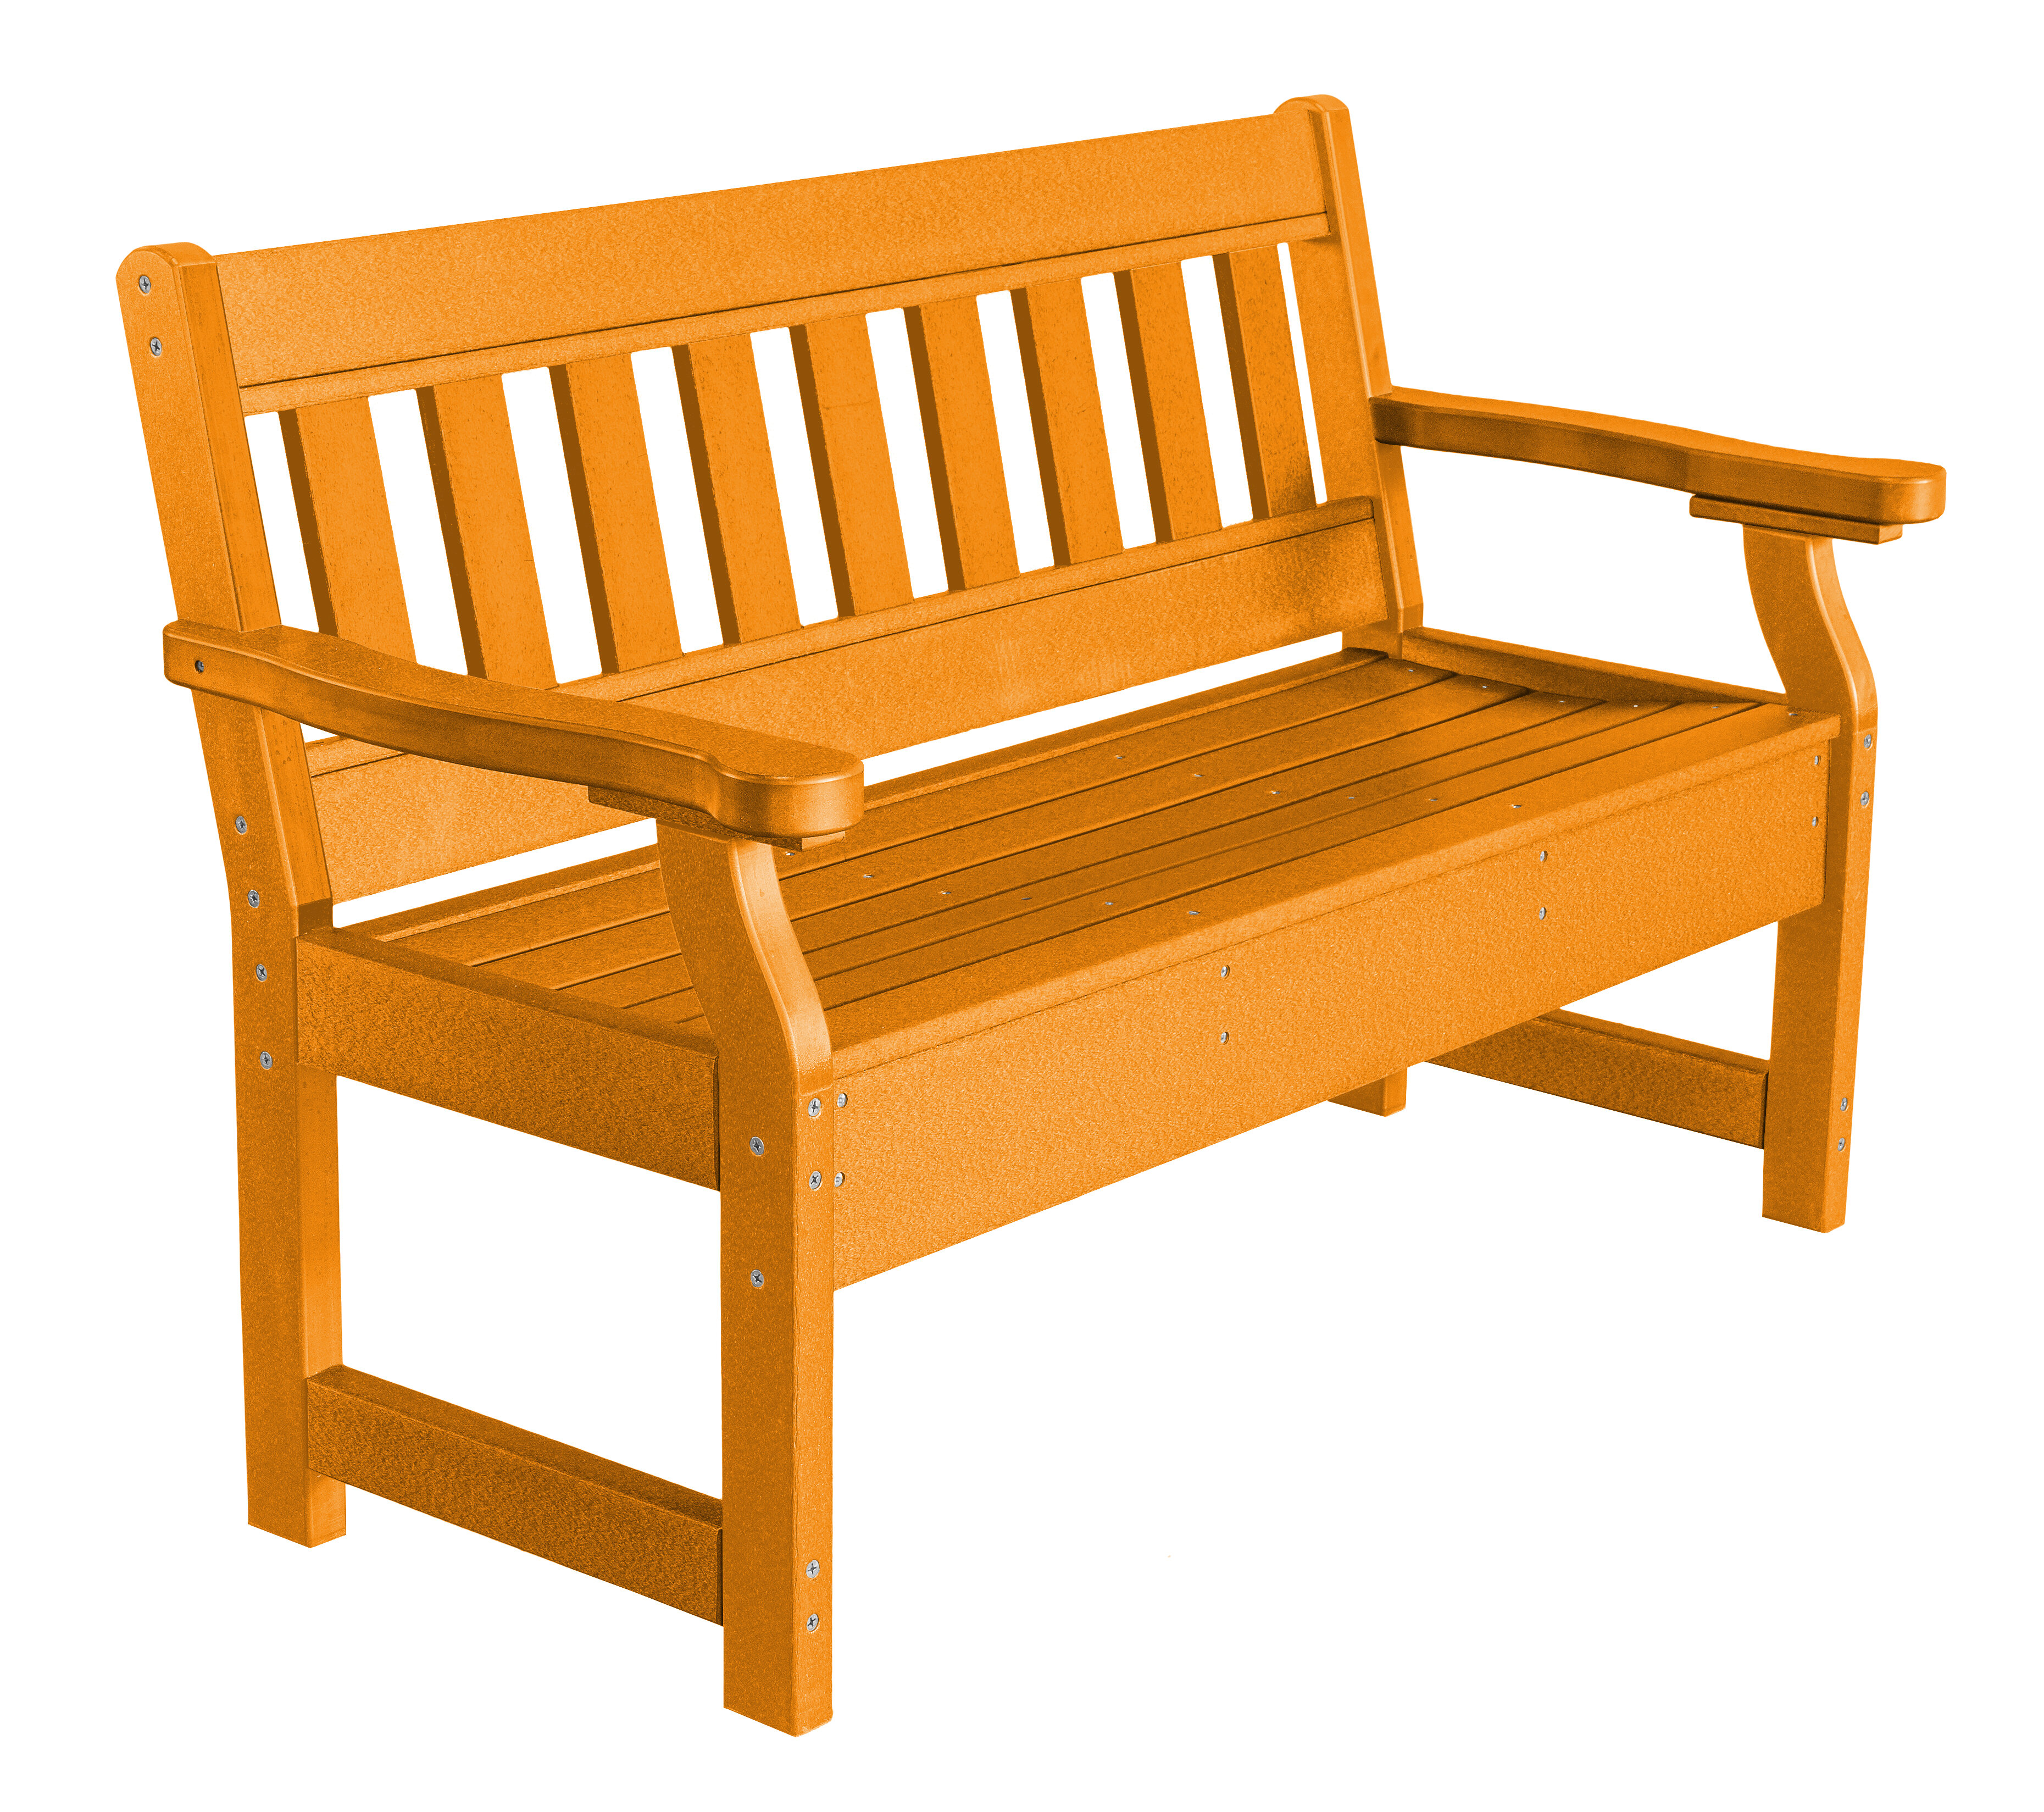 Rosecliff Heights Patricia Poly Lumber Garden Bench Reviews